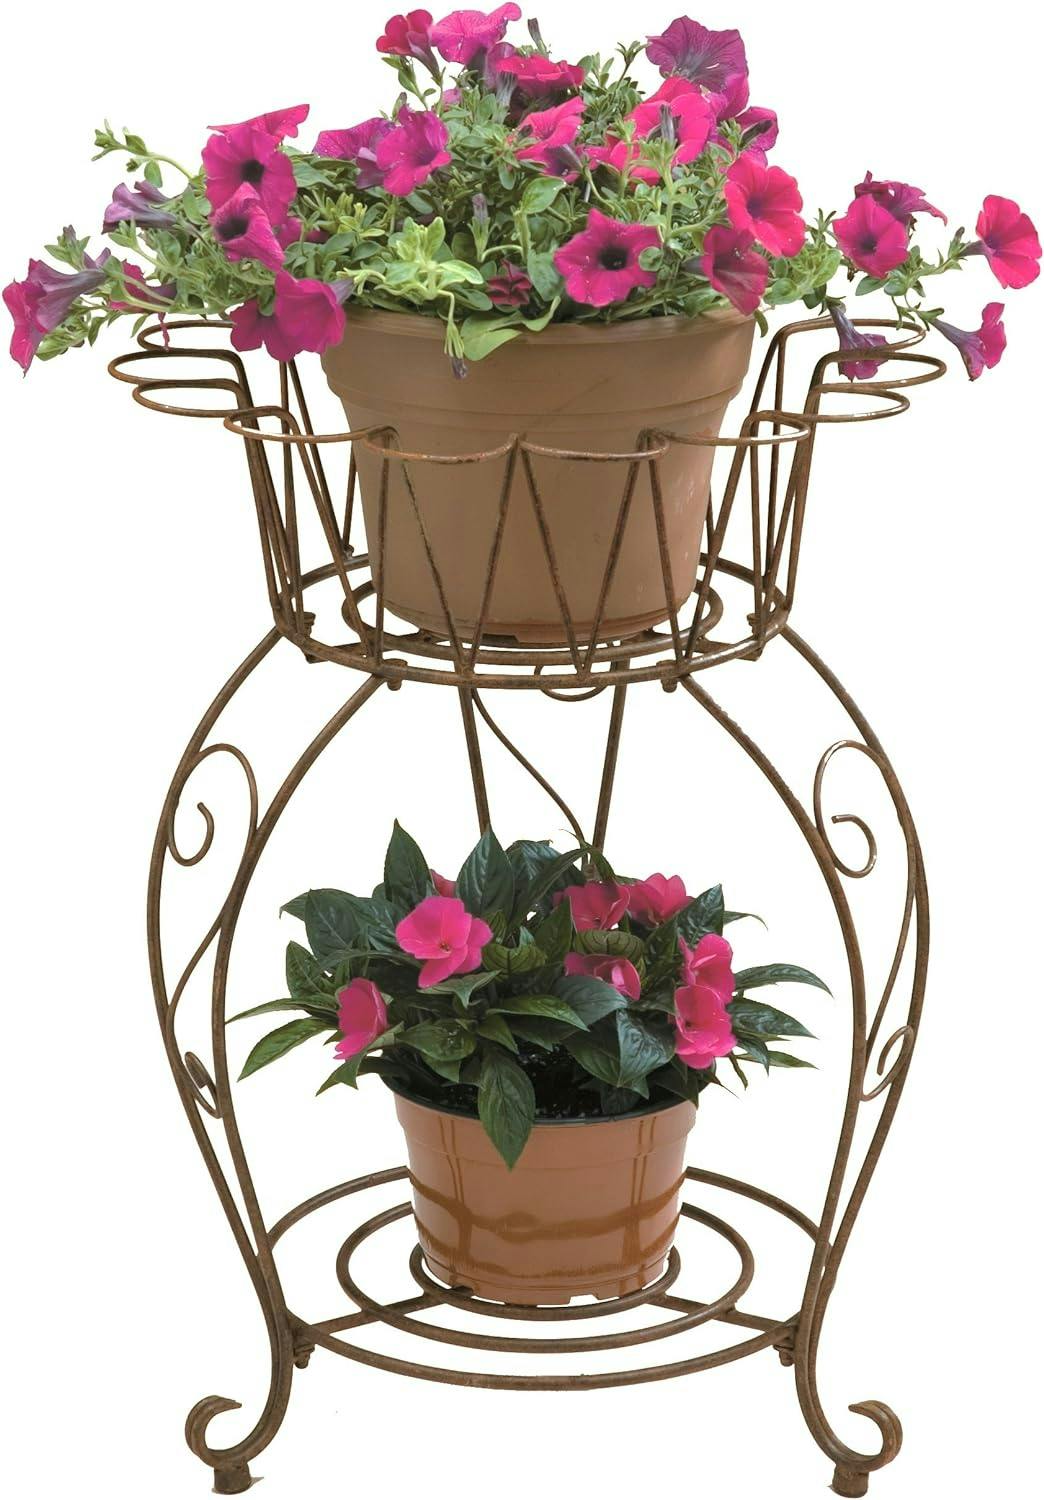 Modern Small Round Wave Planter 20"x20"x25" with Durable Powder Coated Finish